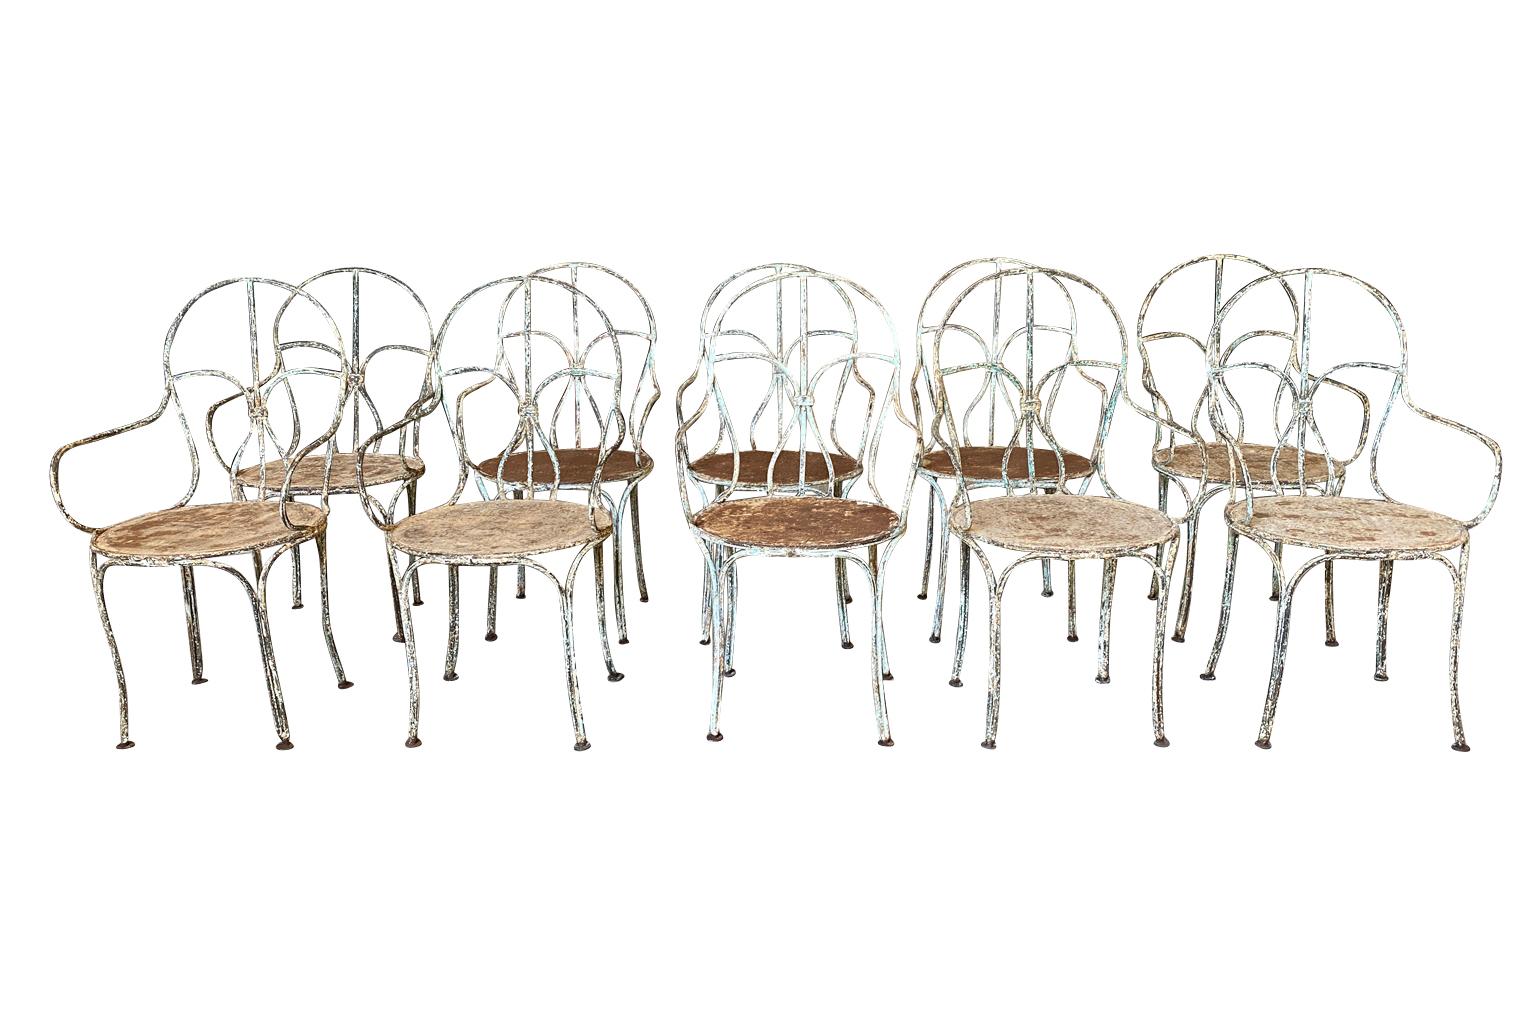 Painted Set of 10 French Garden Dining Chairs